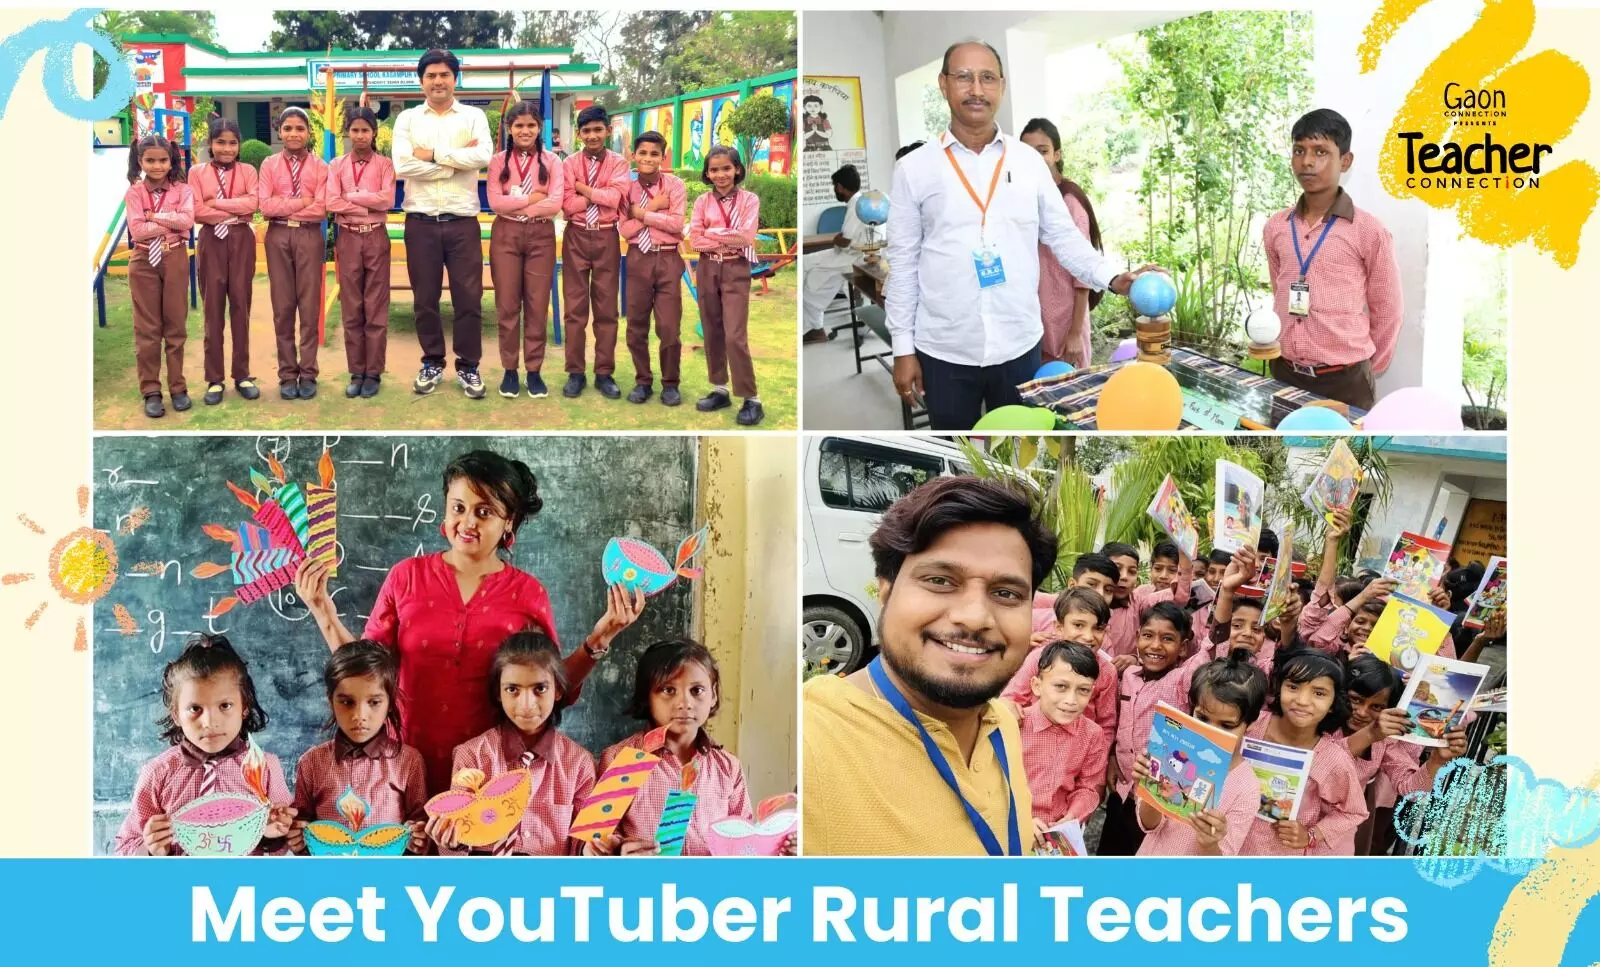 Meet Rural Teachers Who Double Up As YouTubers In Their Efforts To Spread Education